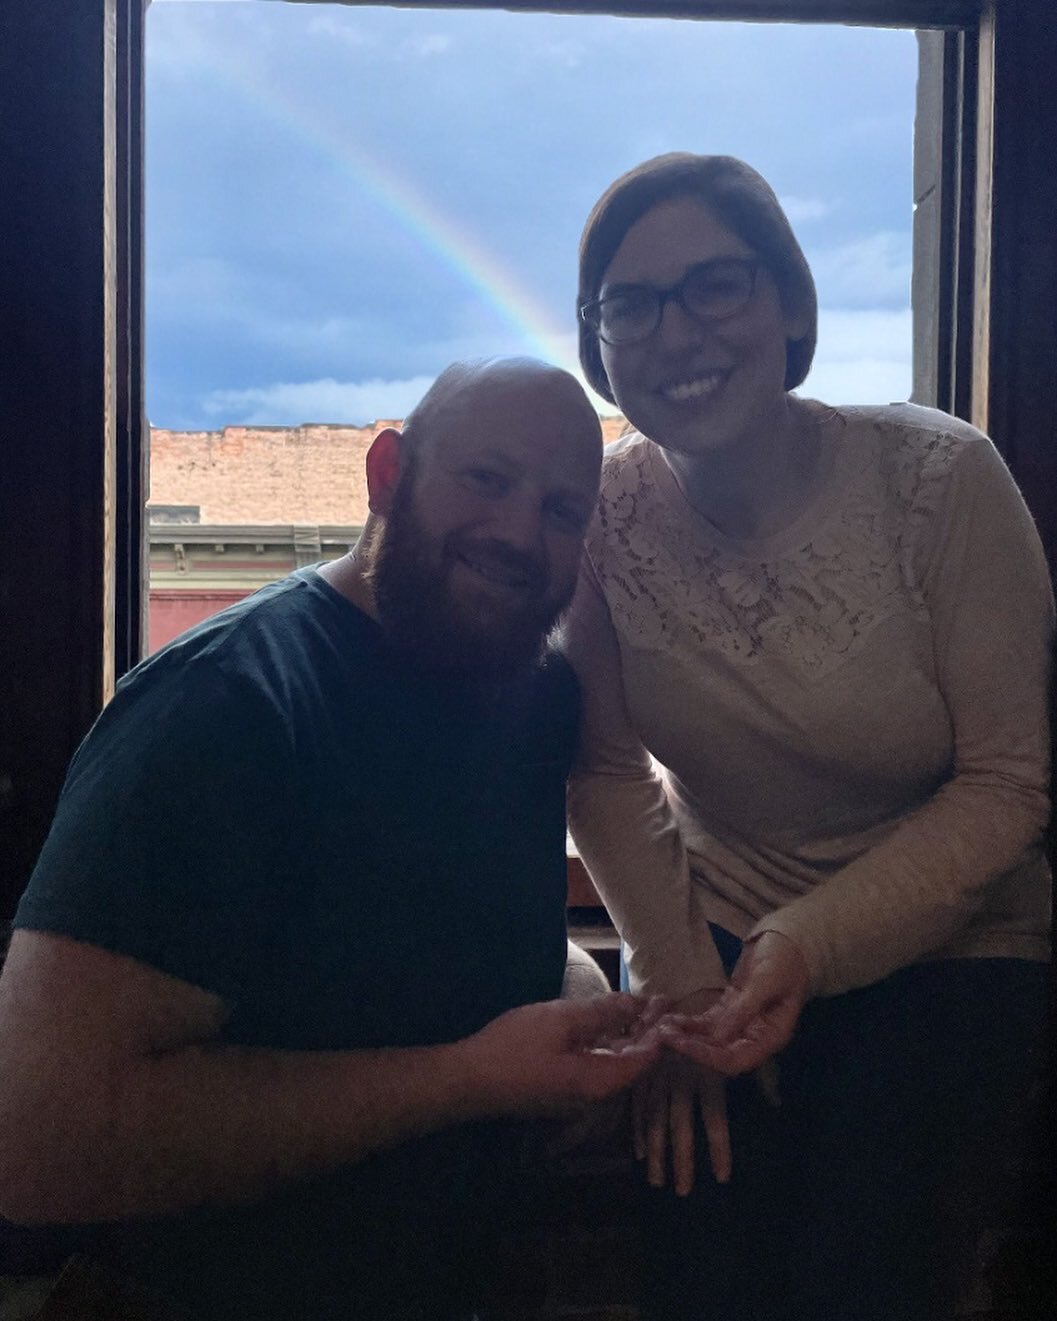 Thinking about Katherine and Patrick today! 🌈🍀 They met at Notre Dame and are welcoming their wedding guests to town today! AND a rainbow just happened to come out right as they finished their rings back in January! Lots of luck for these two!!